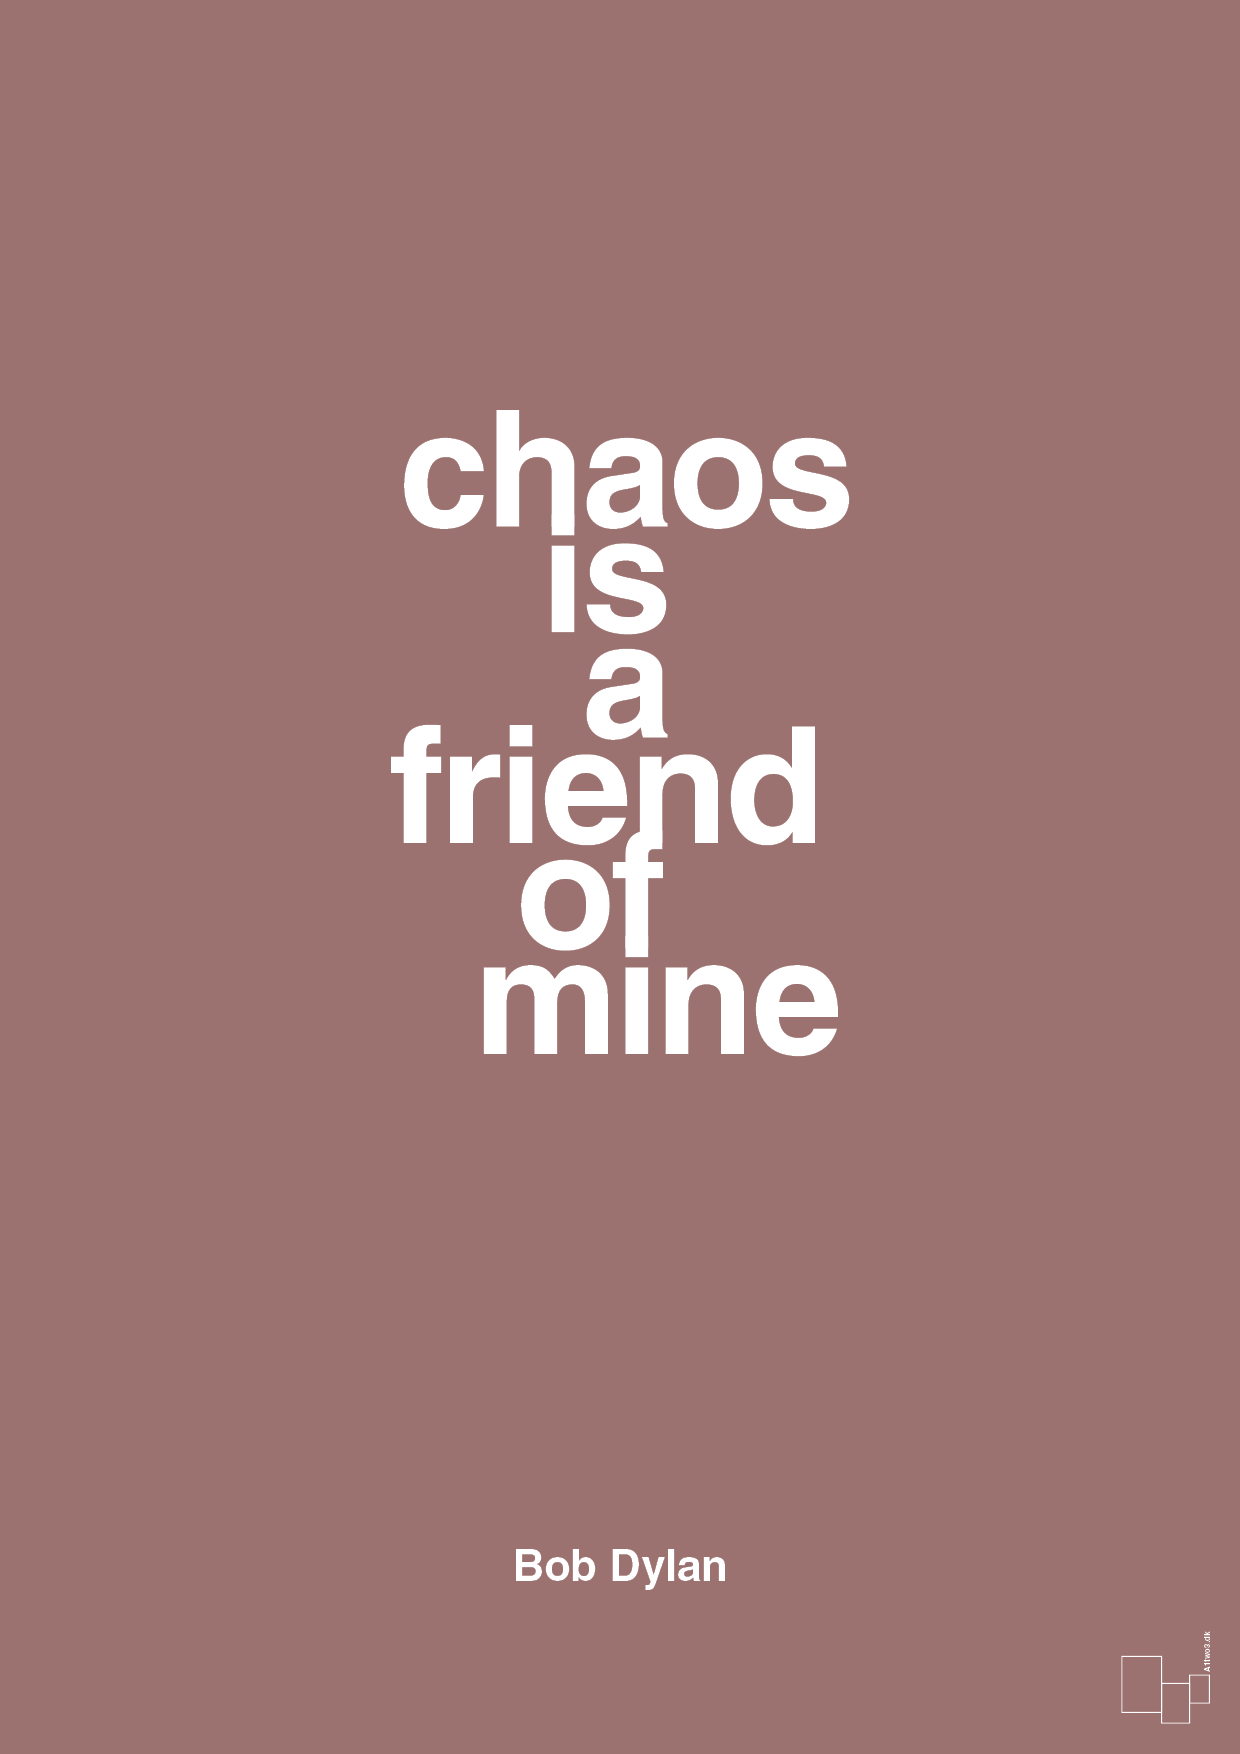 chaos is a friend of mine - Plakat med Citater i Plum